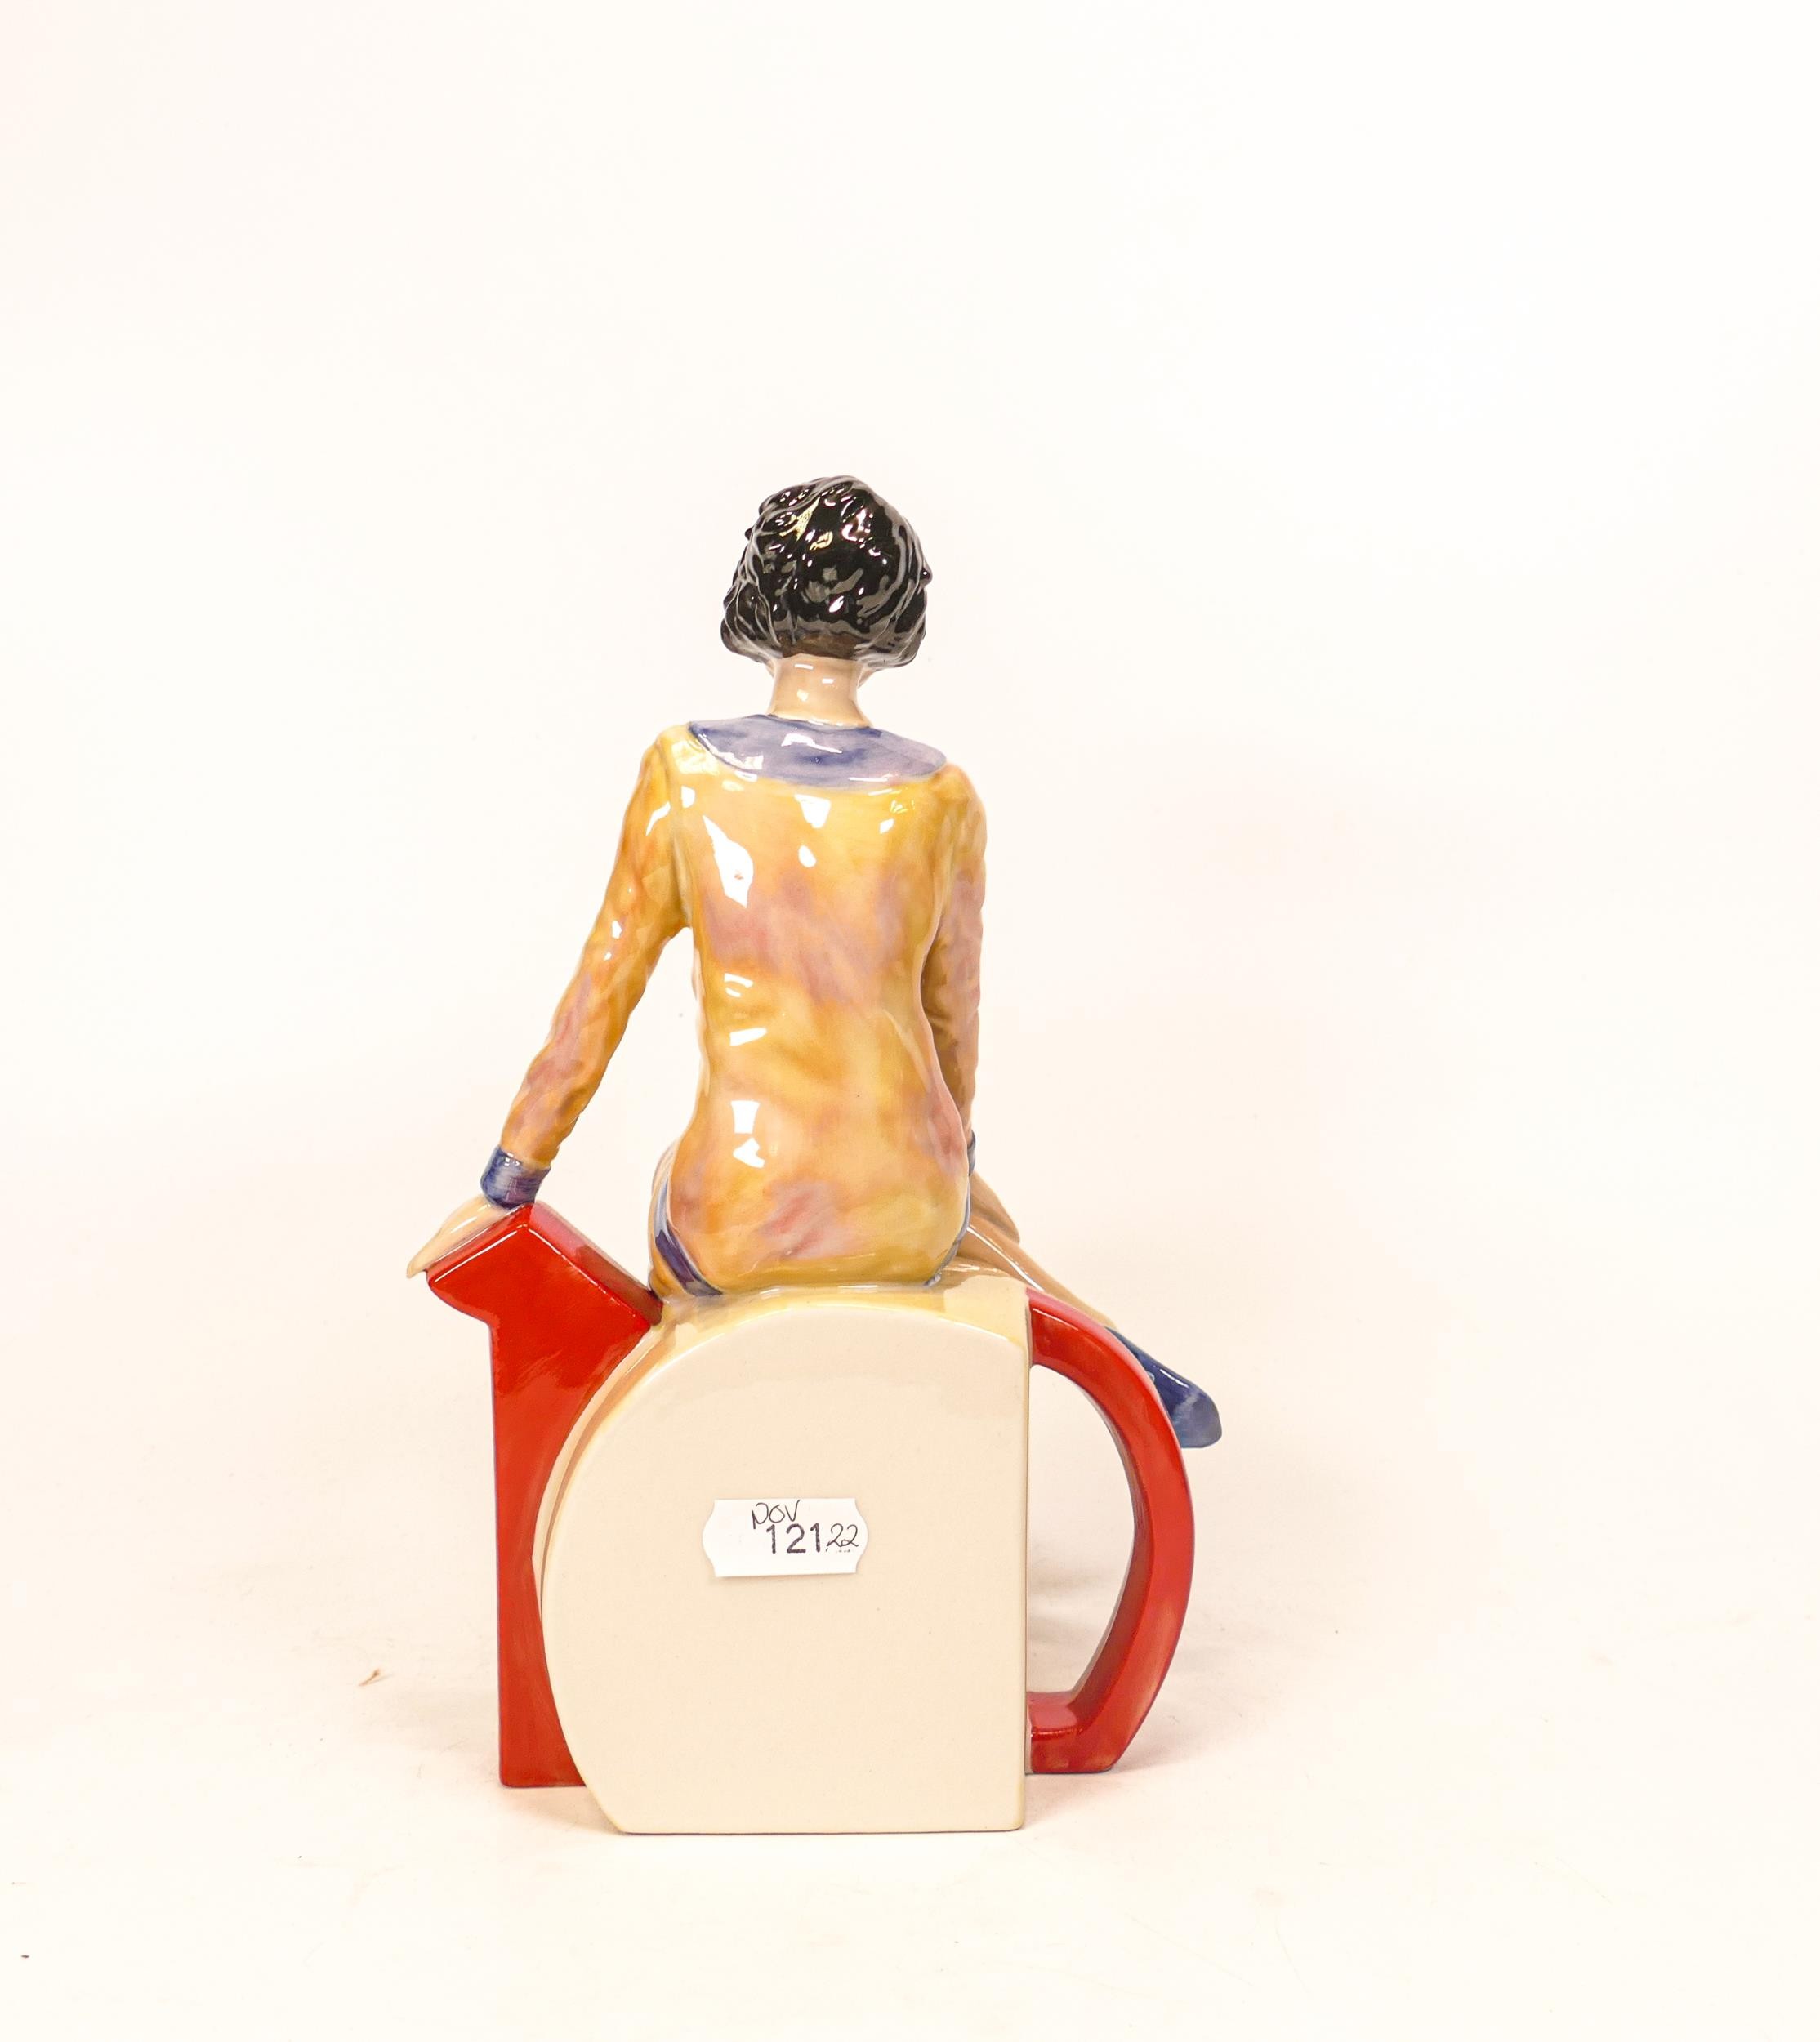 Kevin Francis / Peggy Davies limited edition figure Clarice Cliff - Image 4 of 6